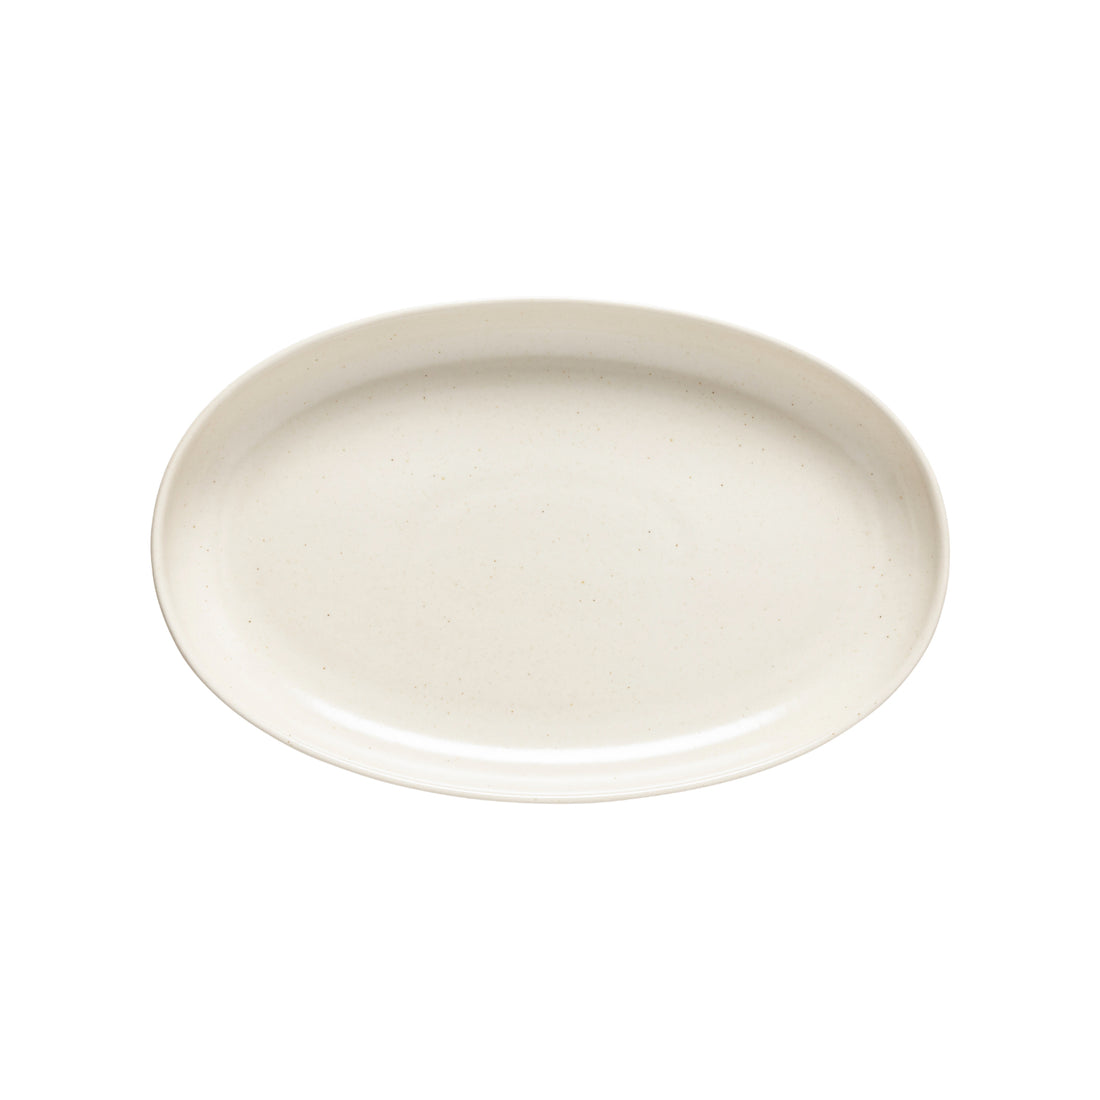 A white oval plate from the Pacifica Vanilla Serveware collection by Casafina Living on a white background, with a matte finish.